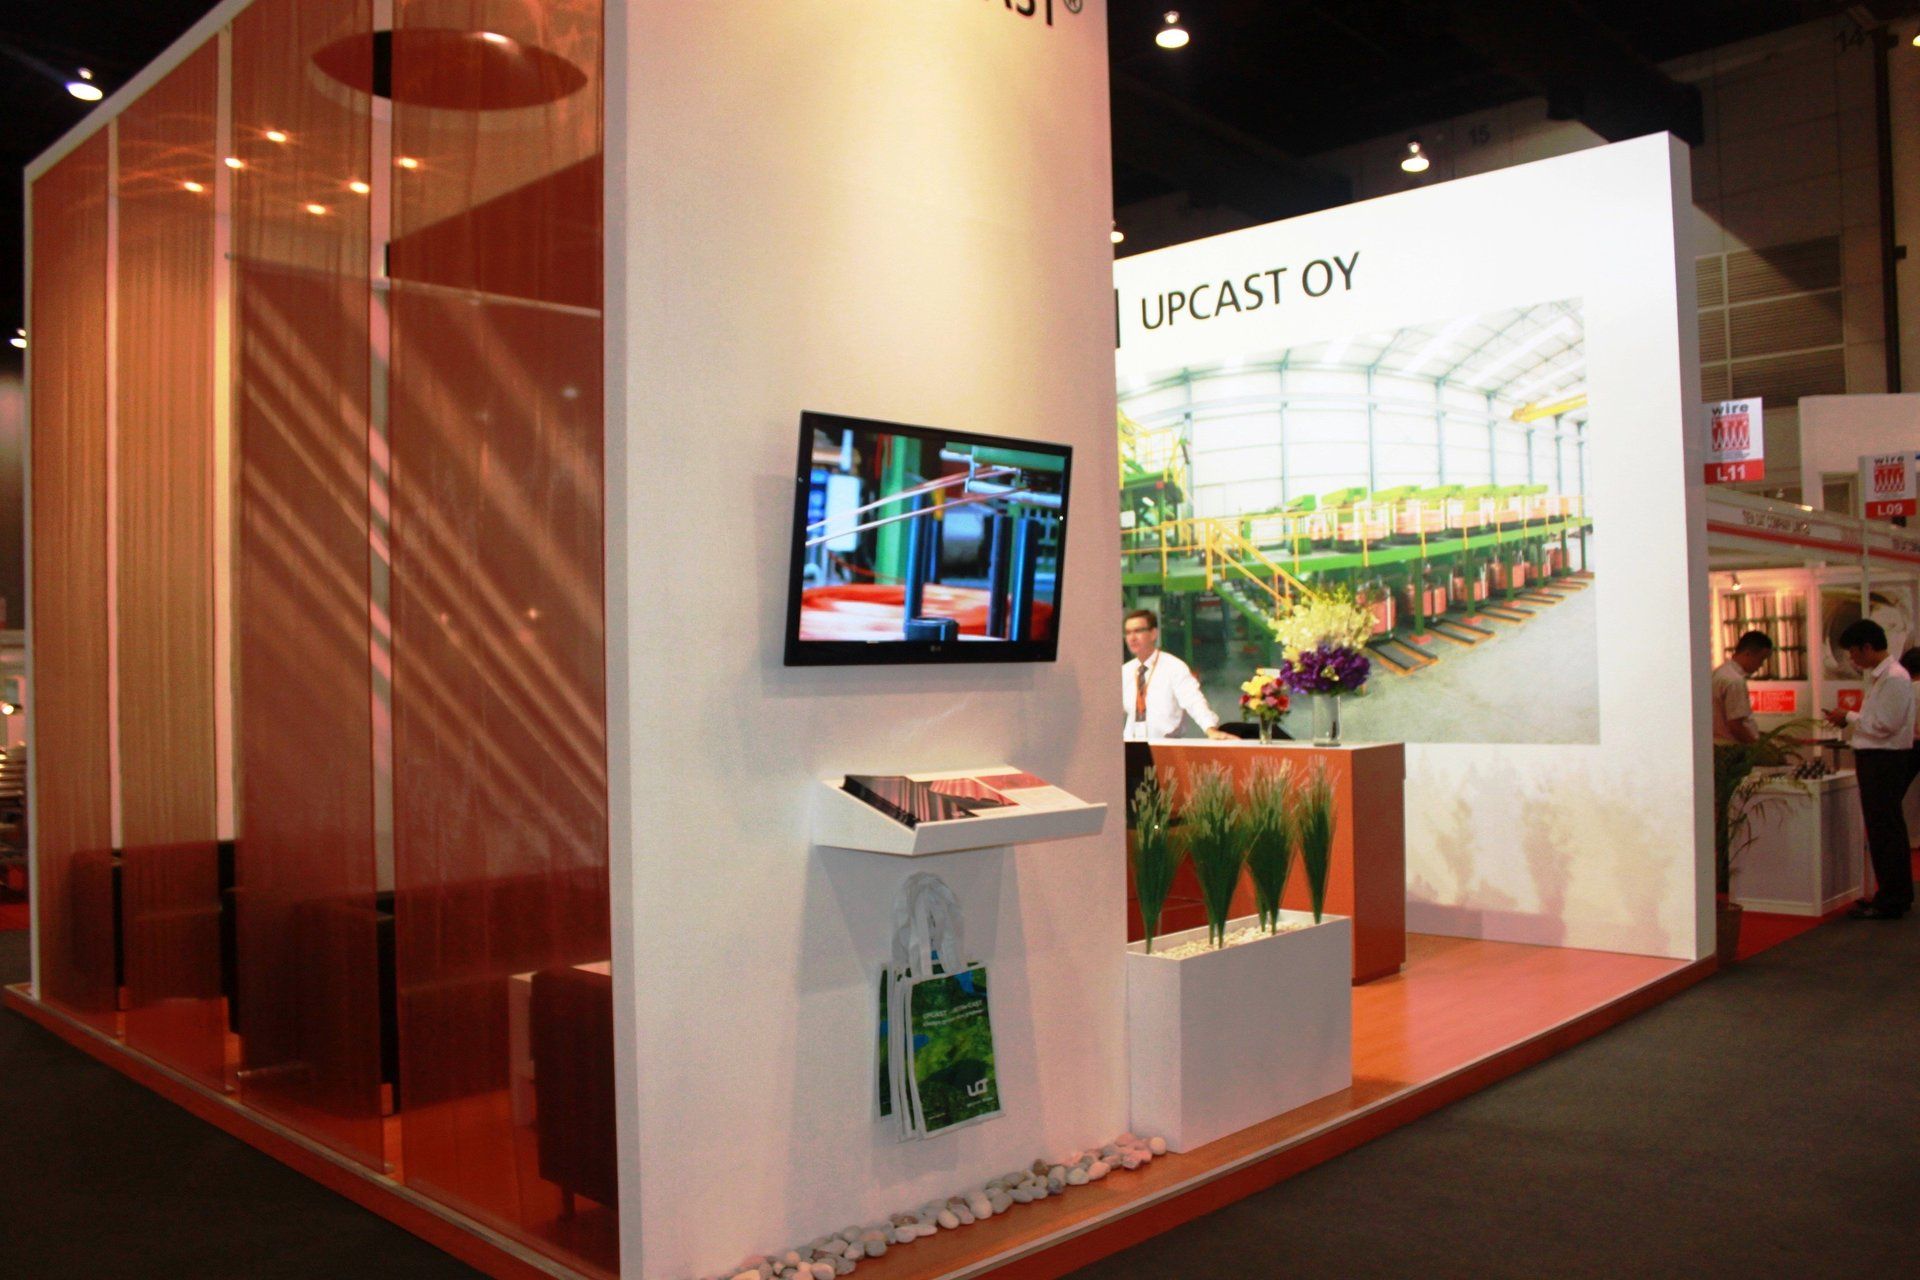 Upcast @ WIRE Southeast Asia 2011. Booth designed and built by Essential Global Fairs.